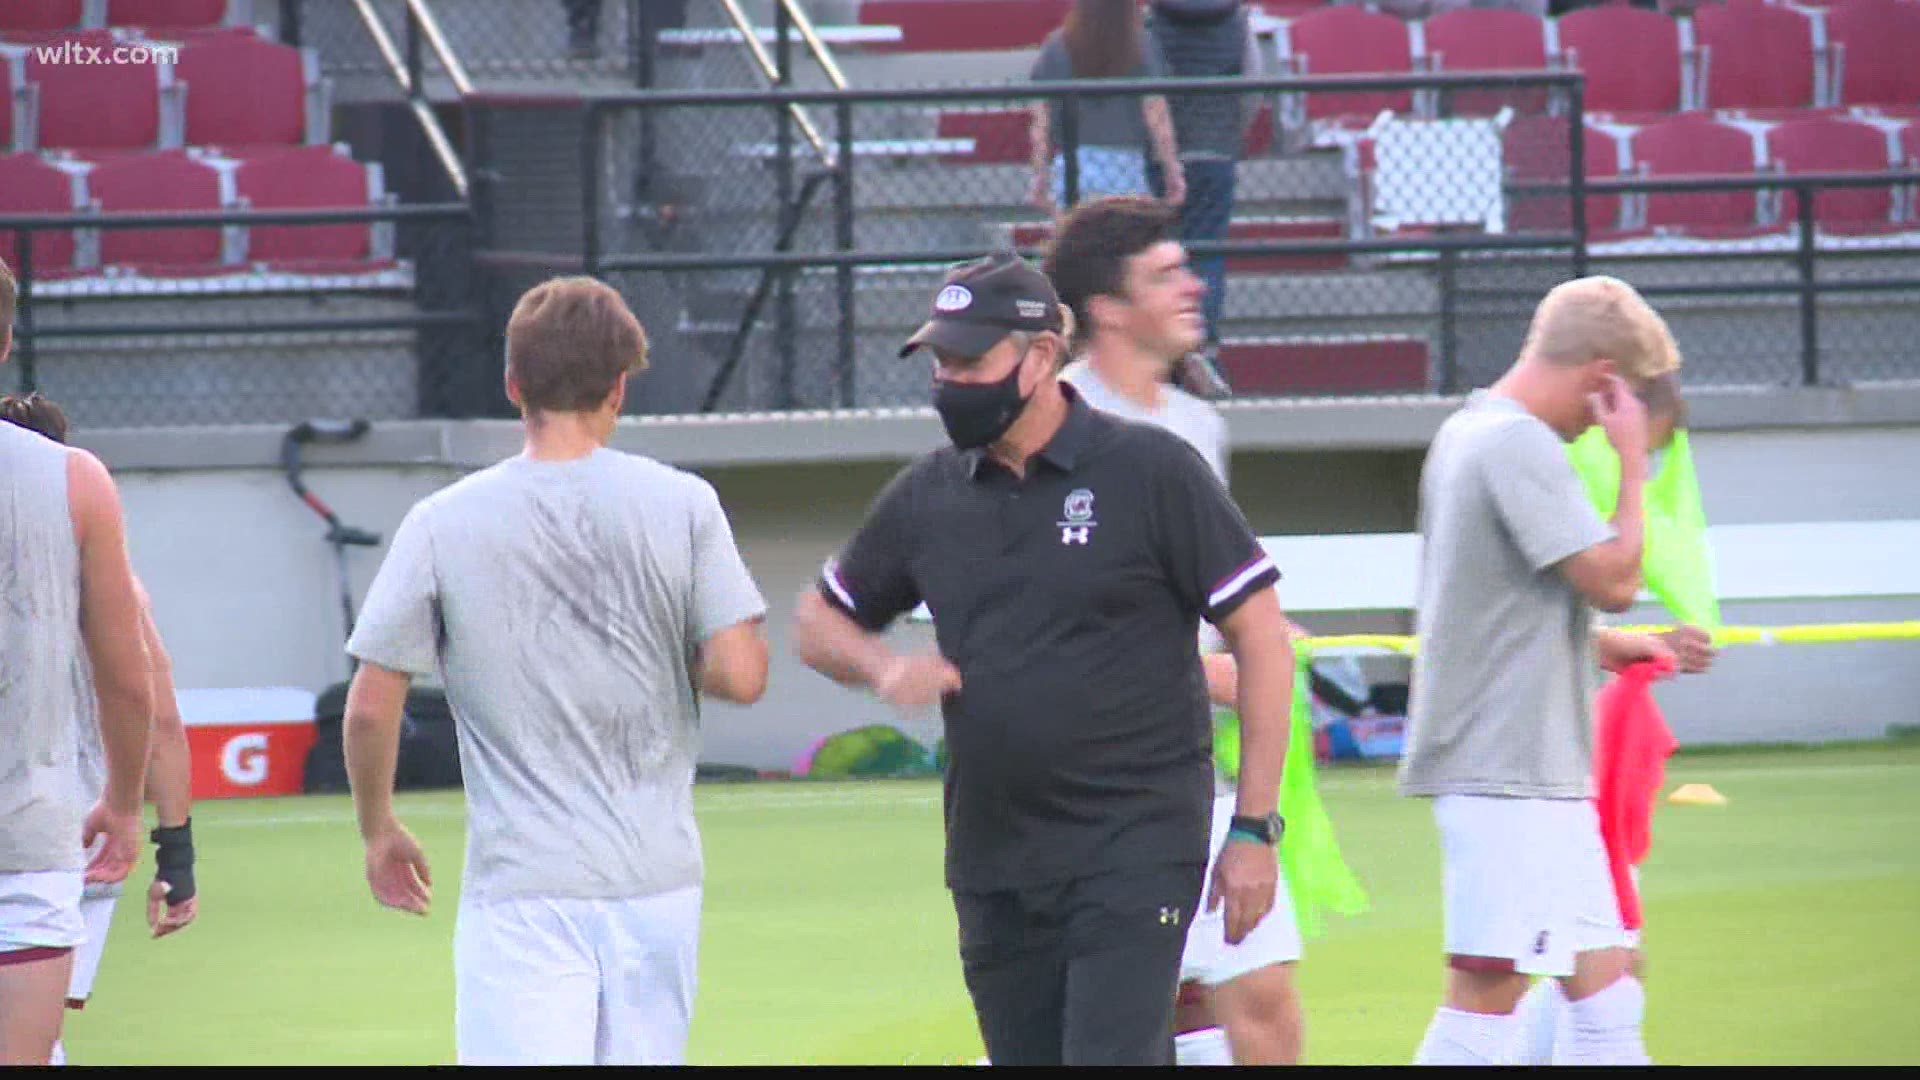 When Mark Berson goes to work Saturday, it will mark his final trip to Stone Stadium as the head coach of the South Carolina men's soccer program.